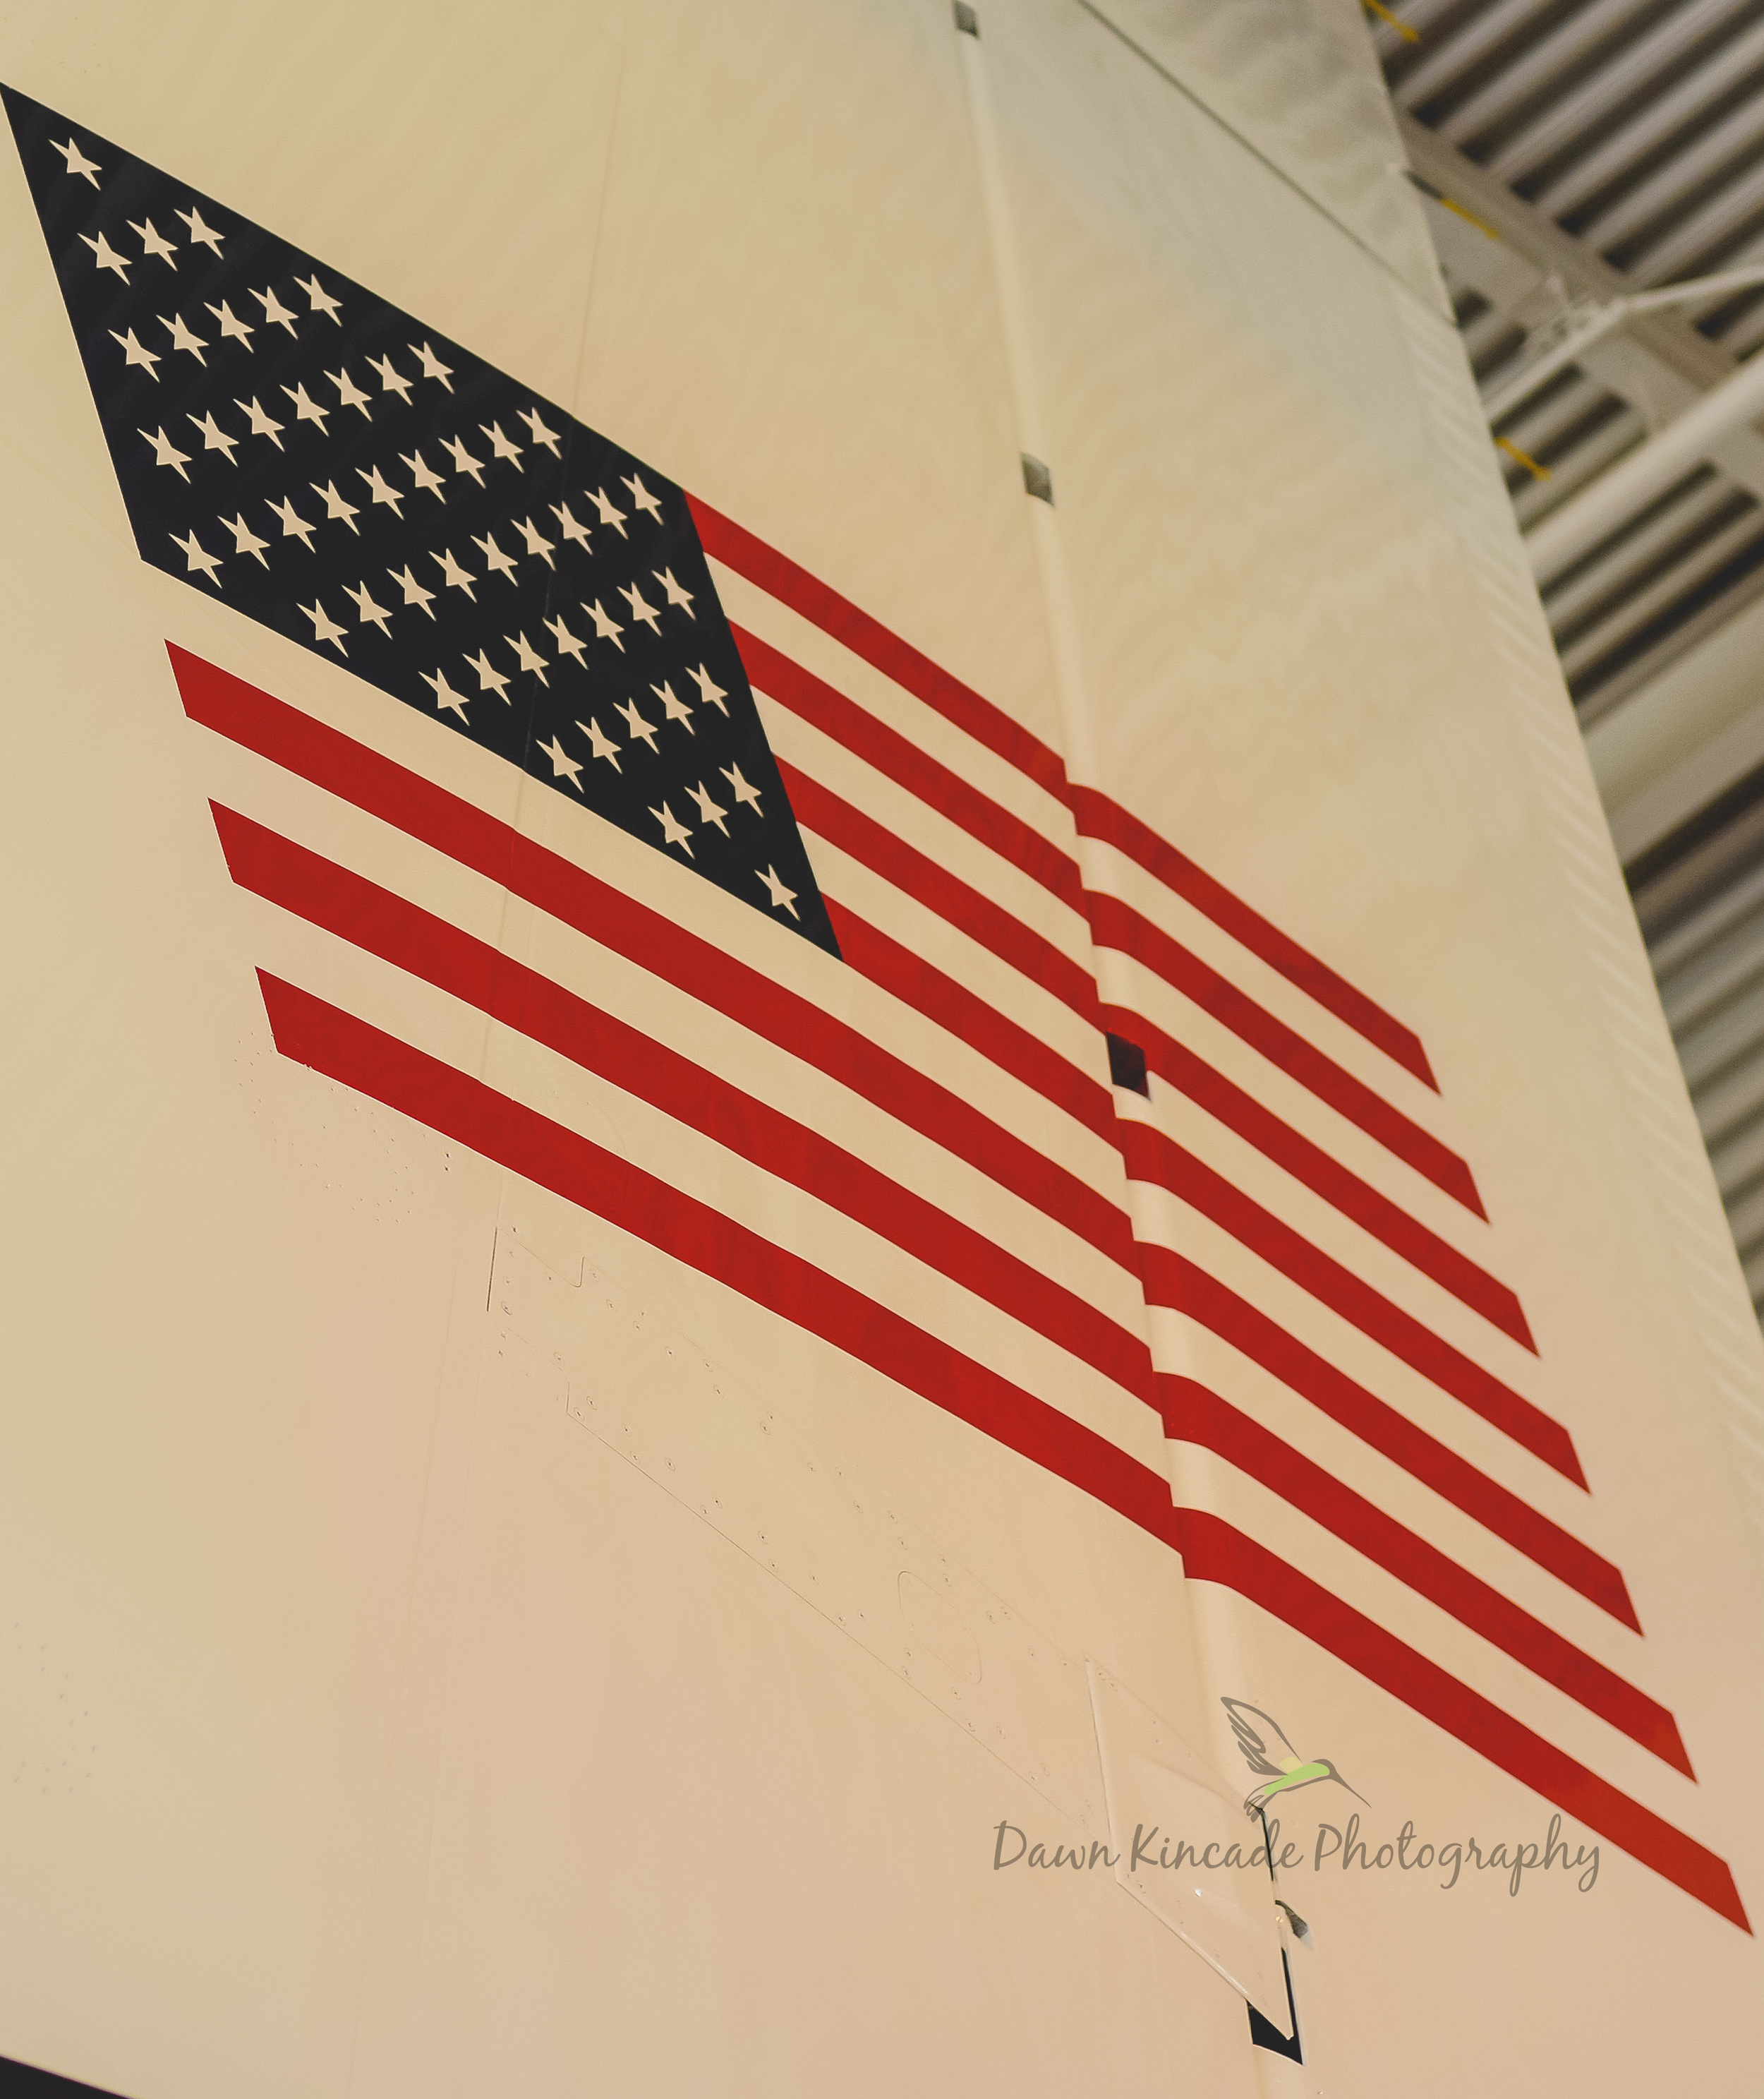 The Flag on the Tail of Air Force One at The Reagan Library